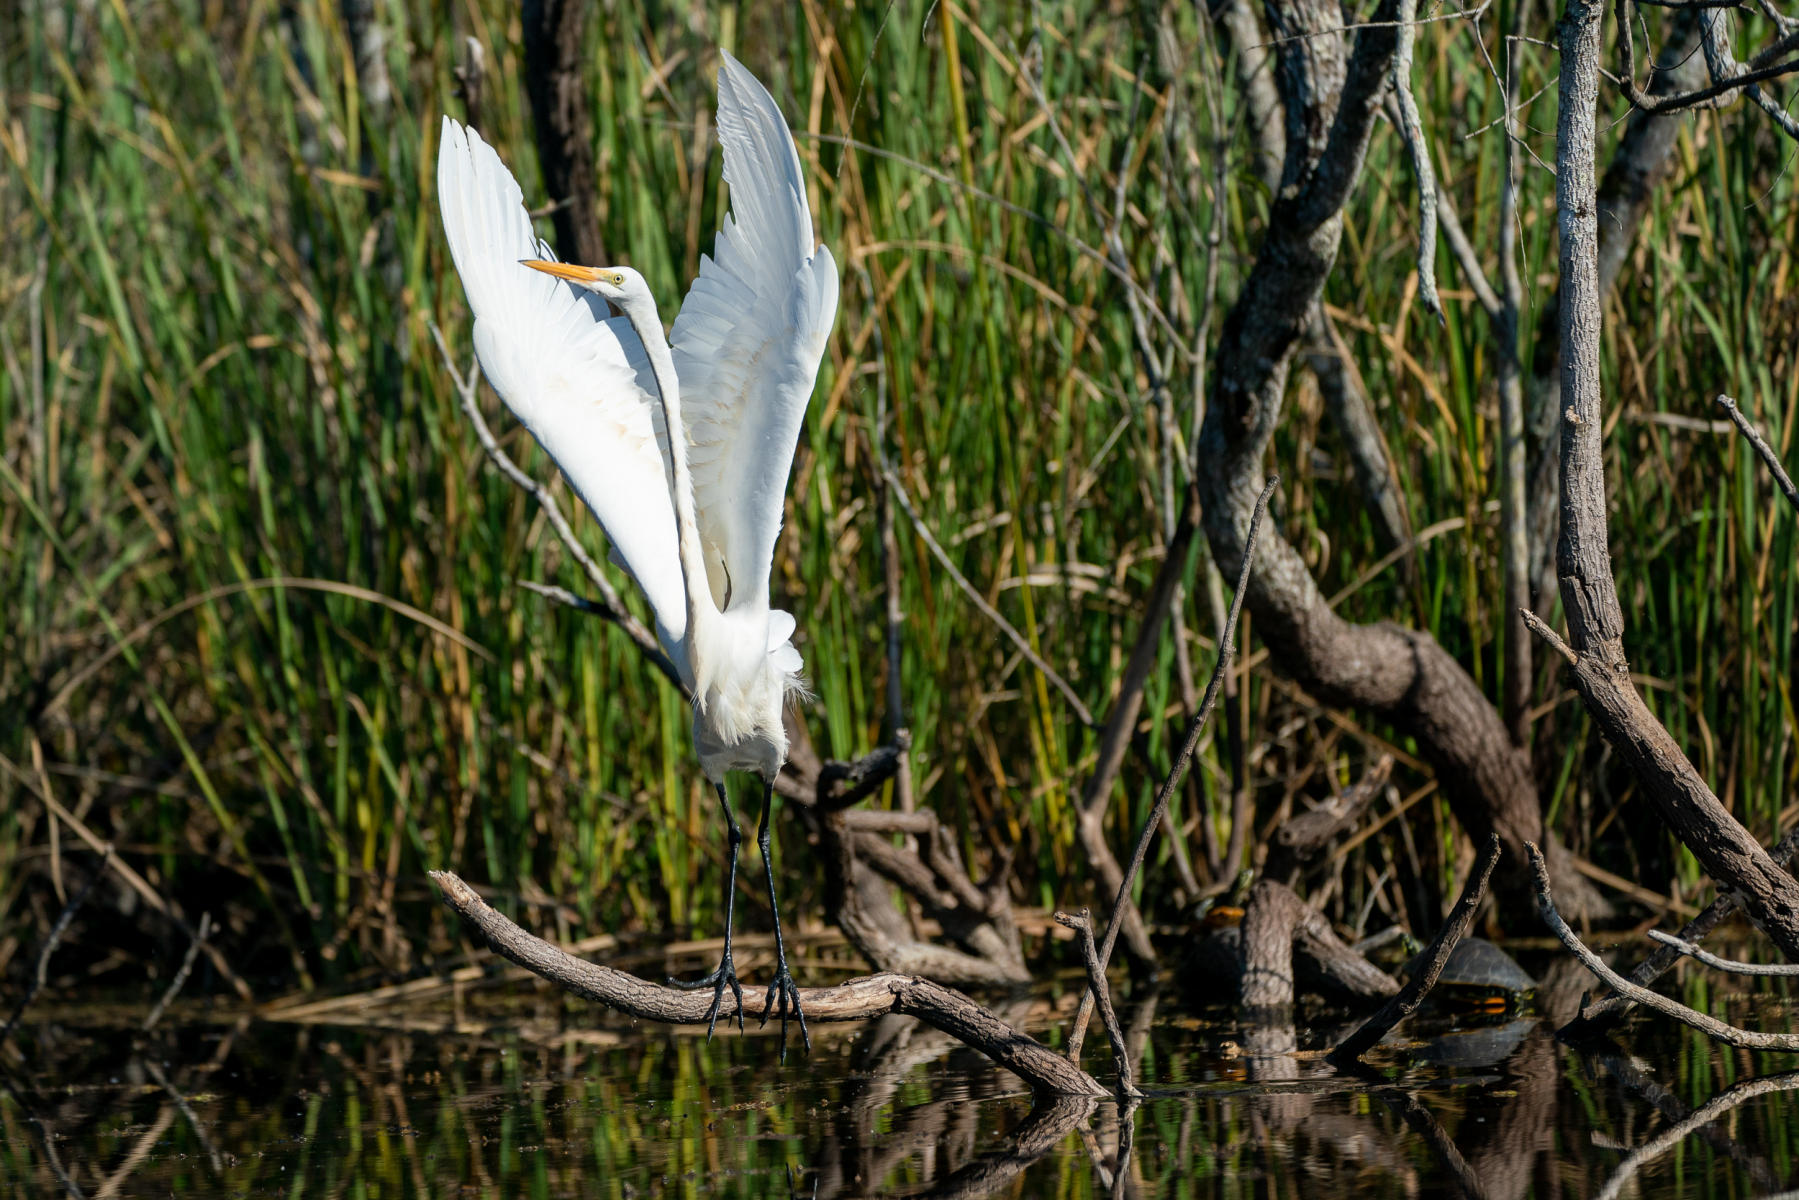 A Great Egret alights on the Turner River in Big Cypress Preserve